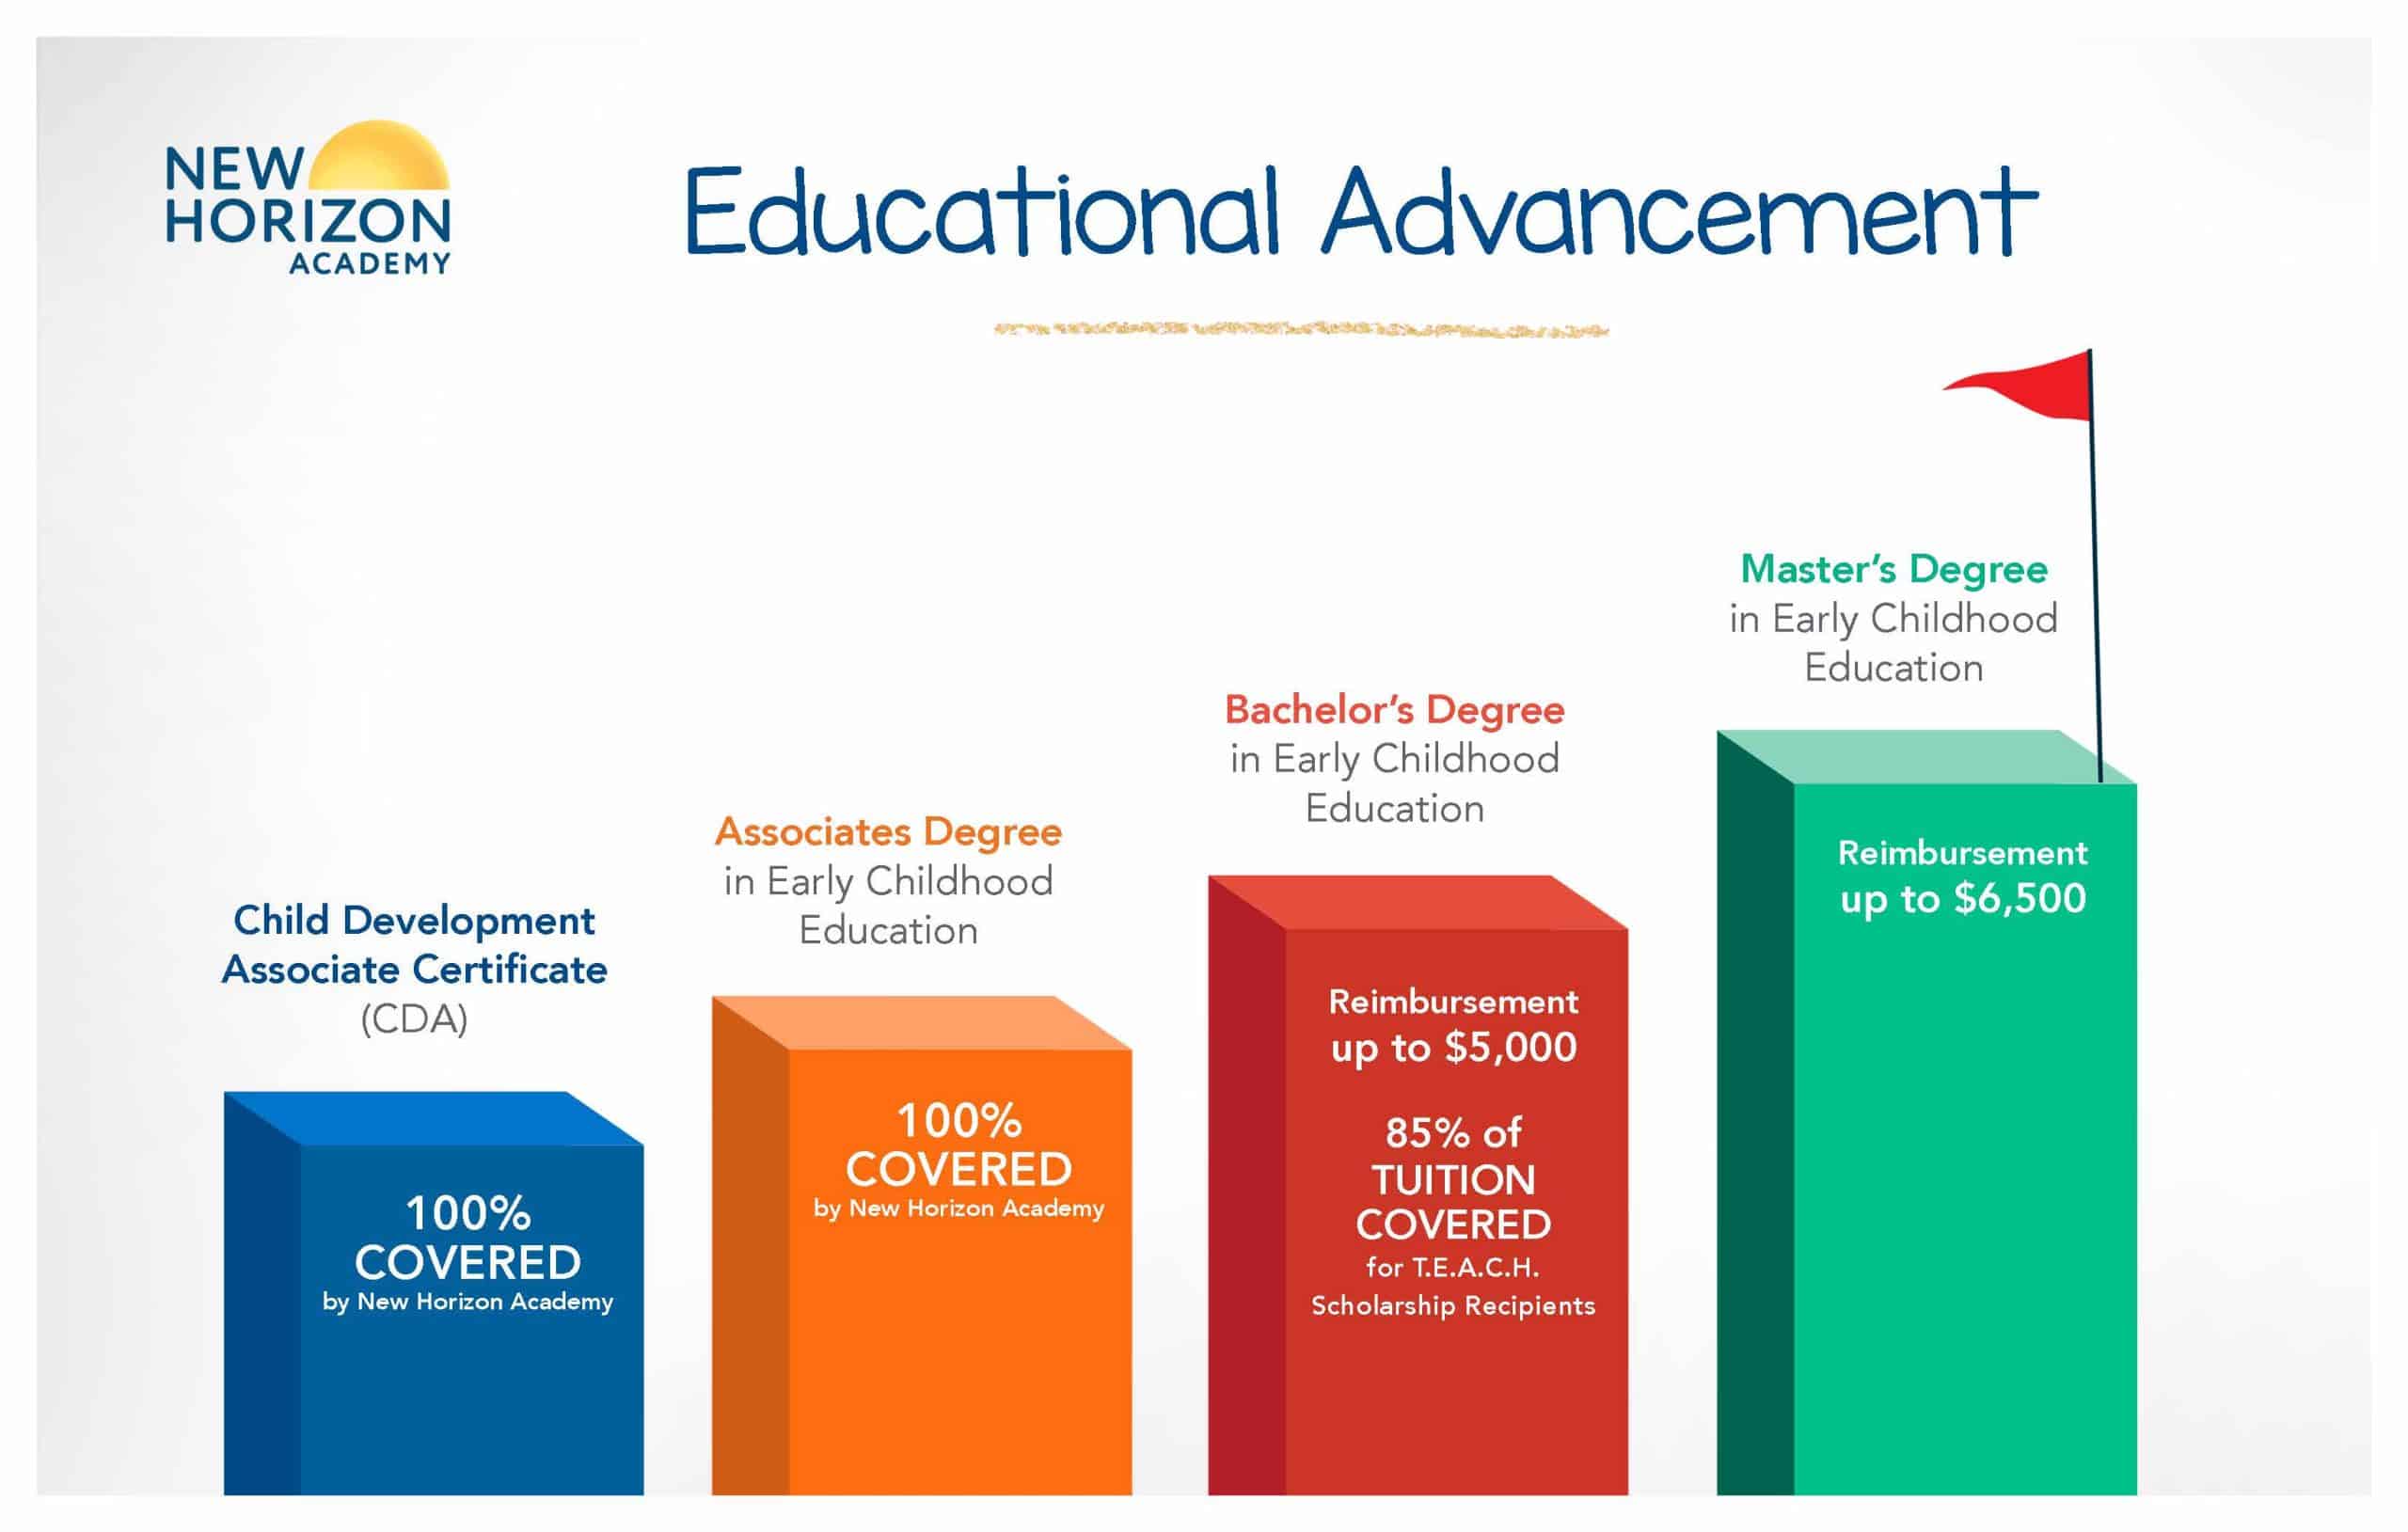 Educational advancement opportunities at New Horizon Academy